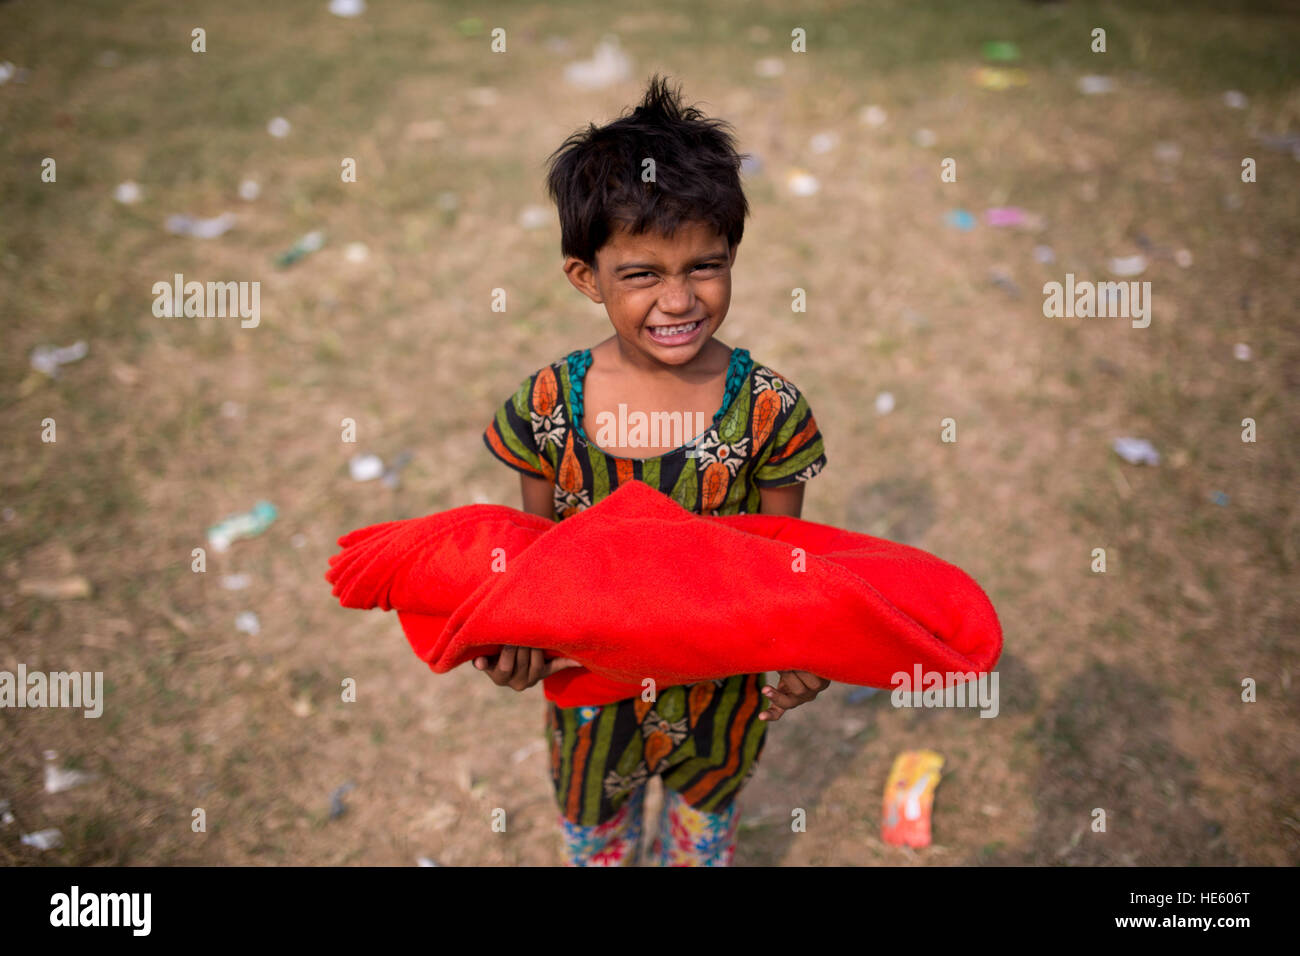 DHAKA, BANGLADESH - DECEMBER 17 : A street child shows her smile face after receive blanket in Dhaka, Banhladesh on December 17, 2016. About 44% people of Dhaka are homeless and they are living below of living condition. During winter many organization distribute warm cloths and blanket but these are not enough and sometime they made quarrel for them. Stock Photo